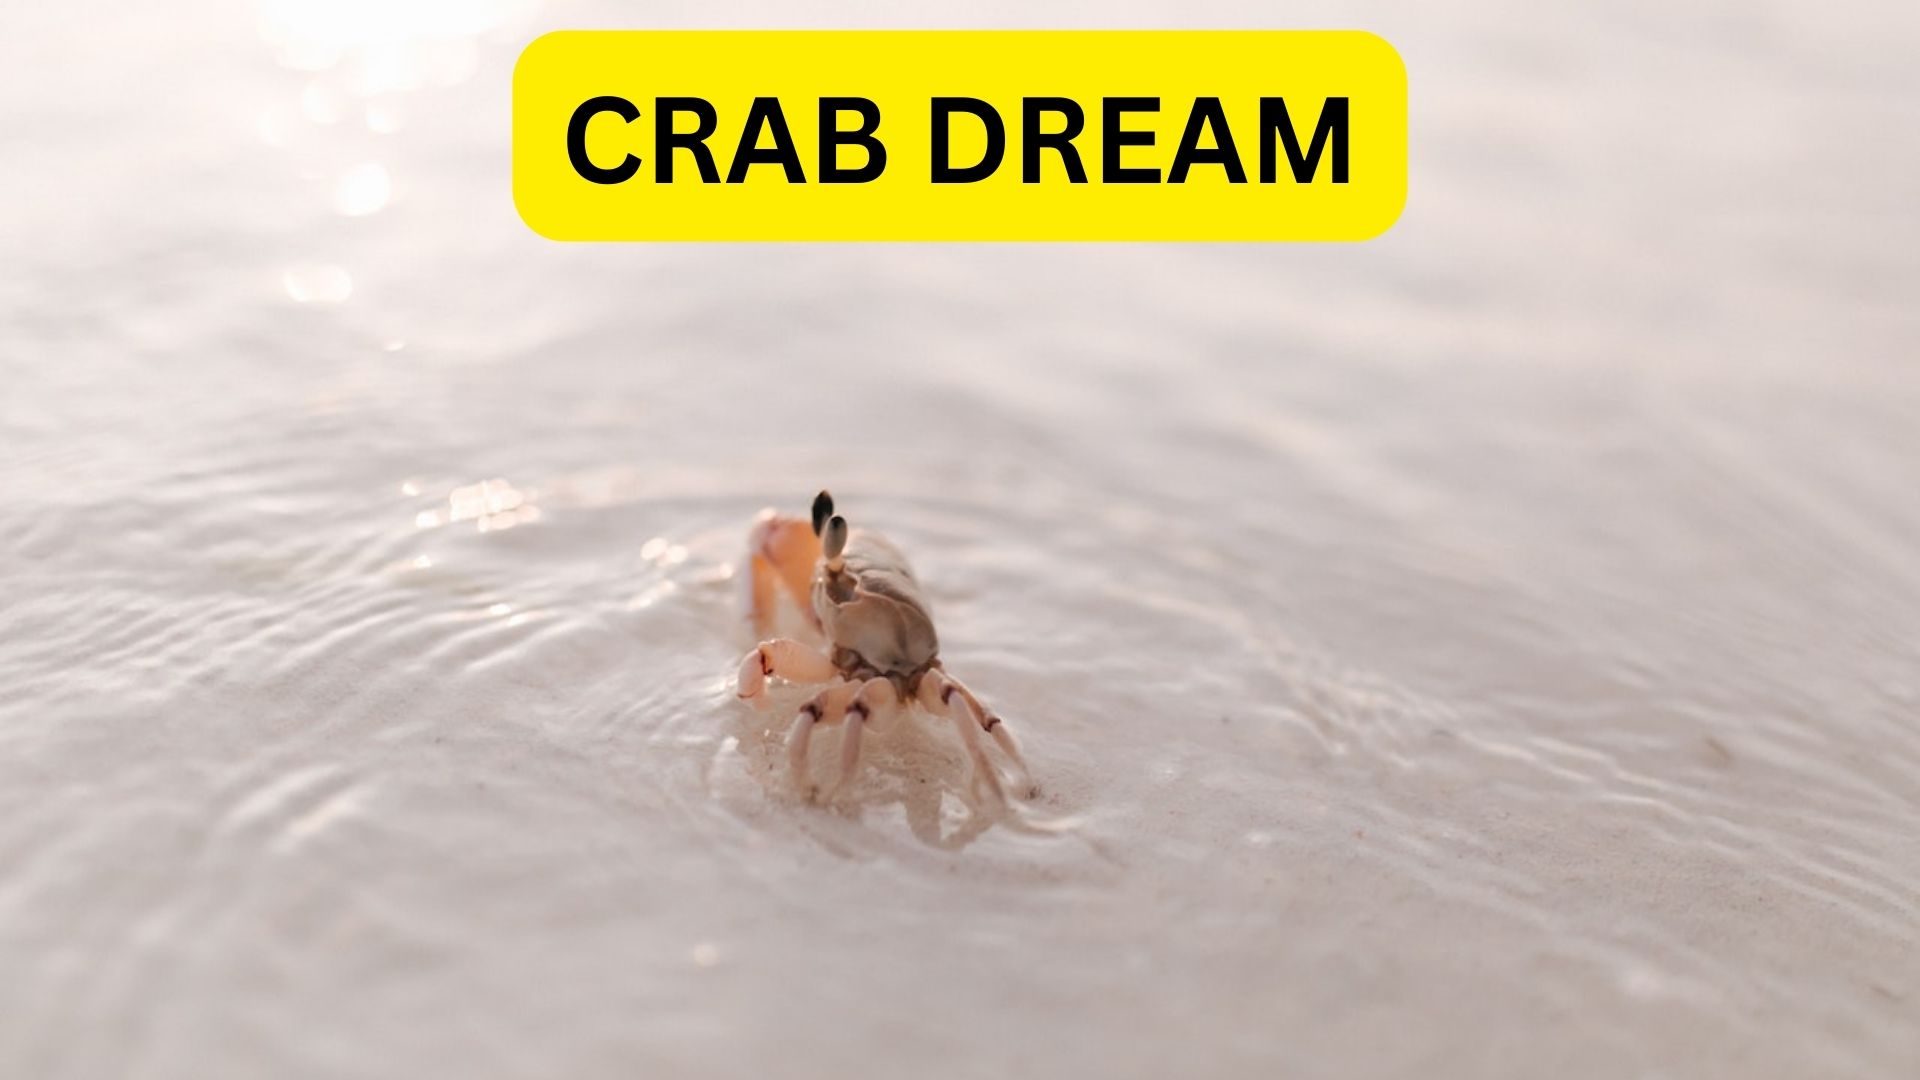 Crab Dream - It Signifies Hiding Something From Others